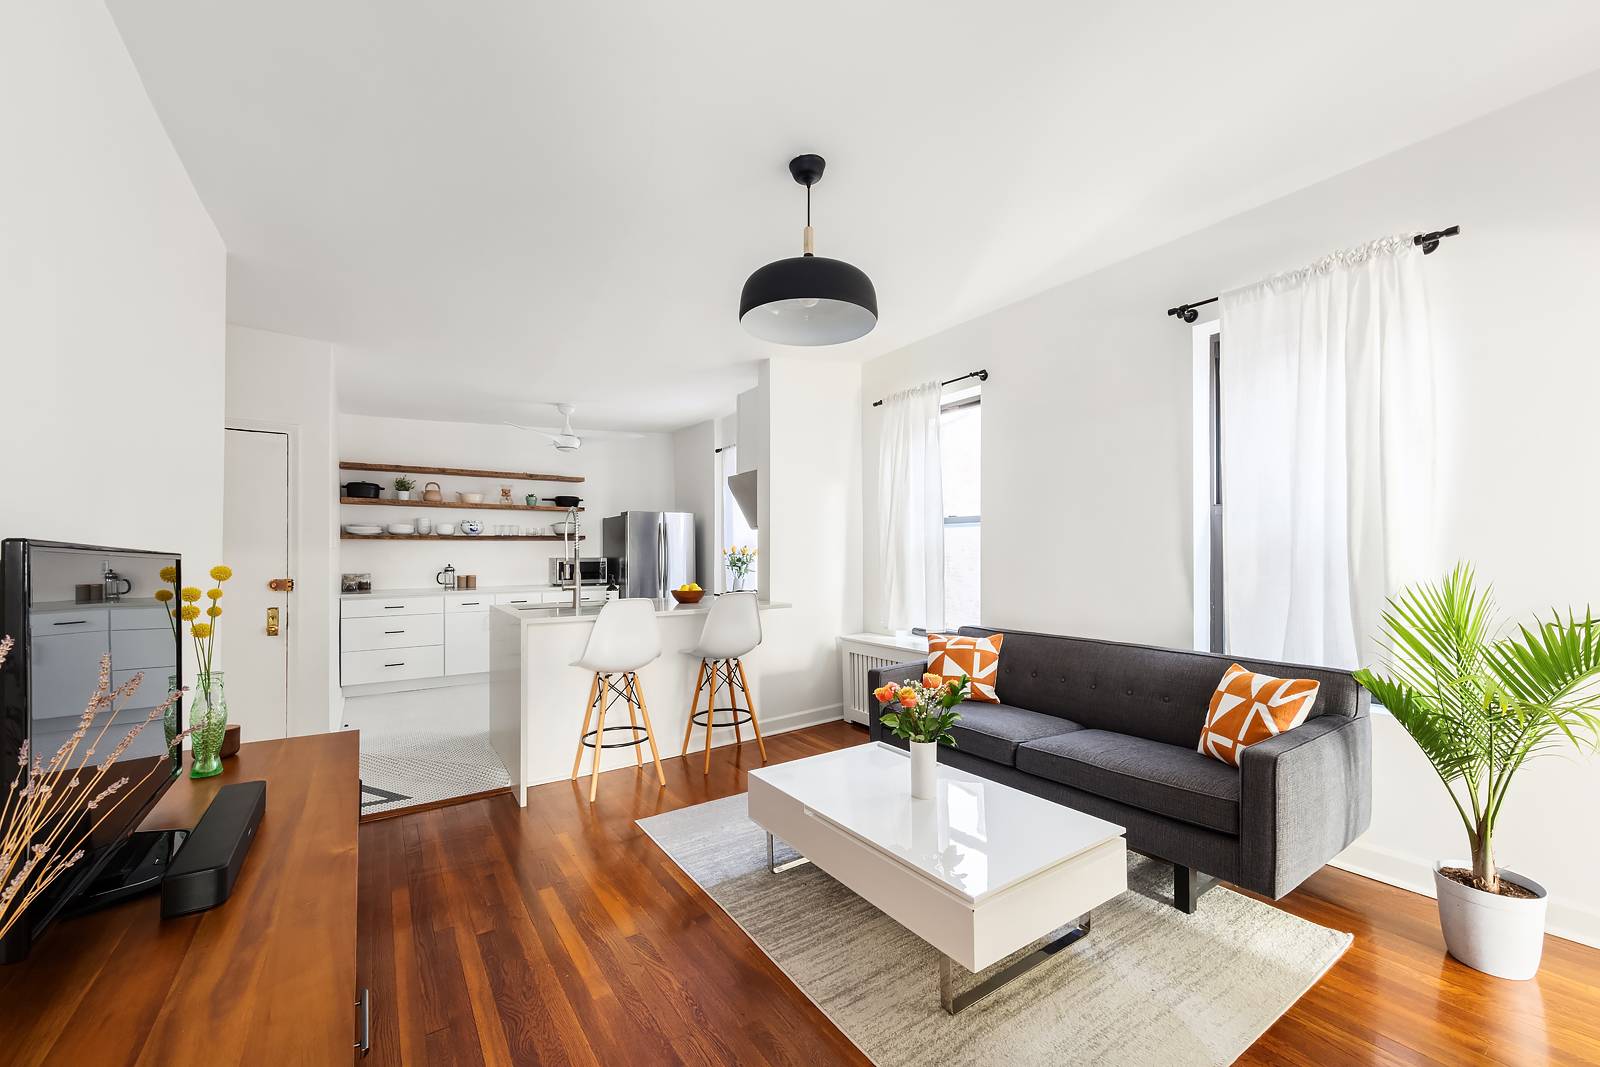 Welcome home to this light filled two bedroom co op that sits conveniently on the border of Prospect Heights and North Park Slope.